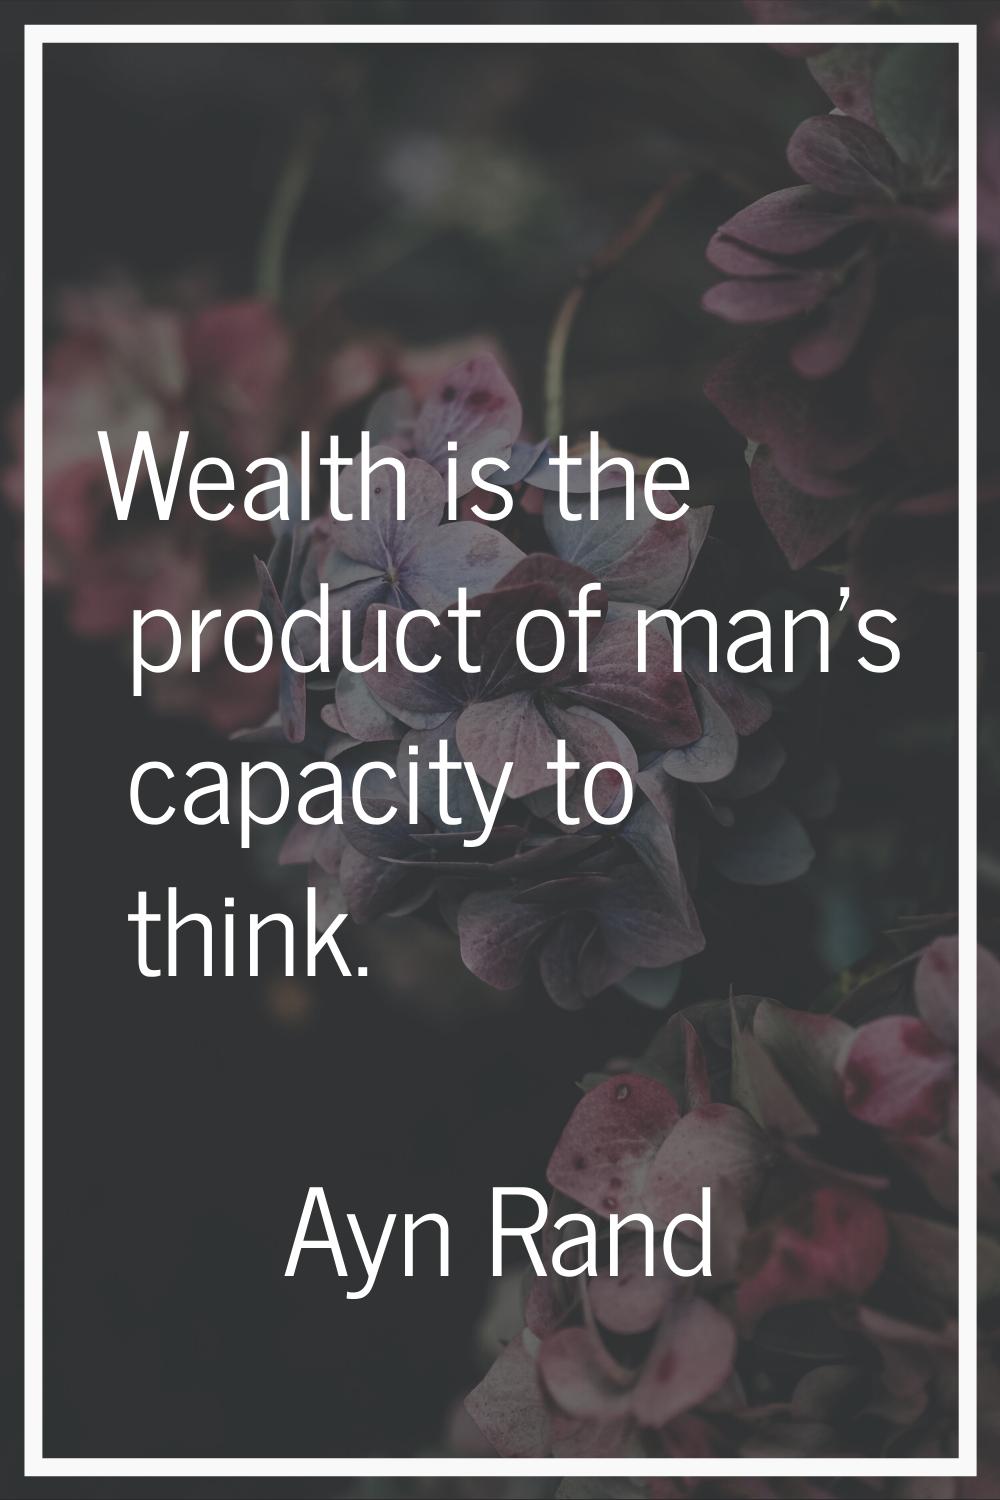 Wealth is the product of man's capacity to think.